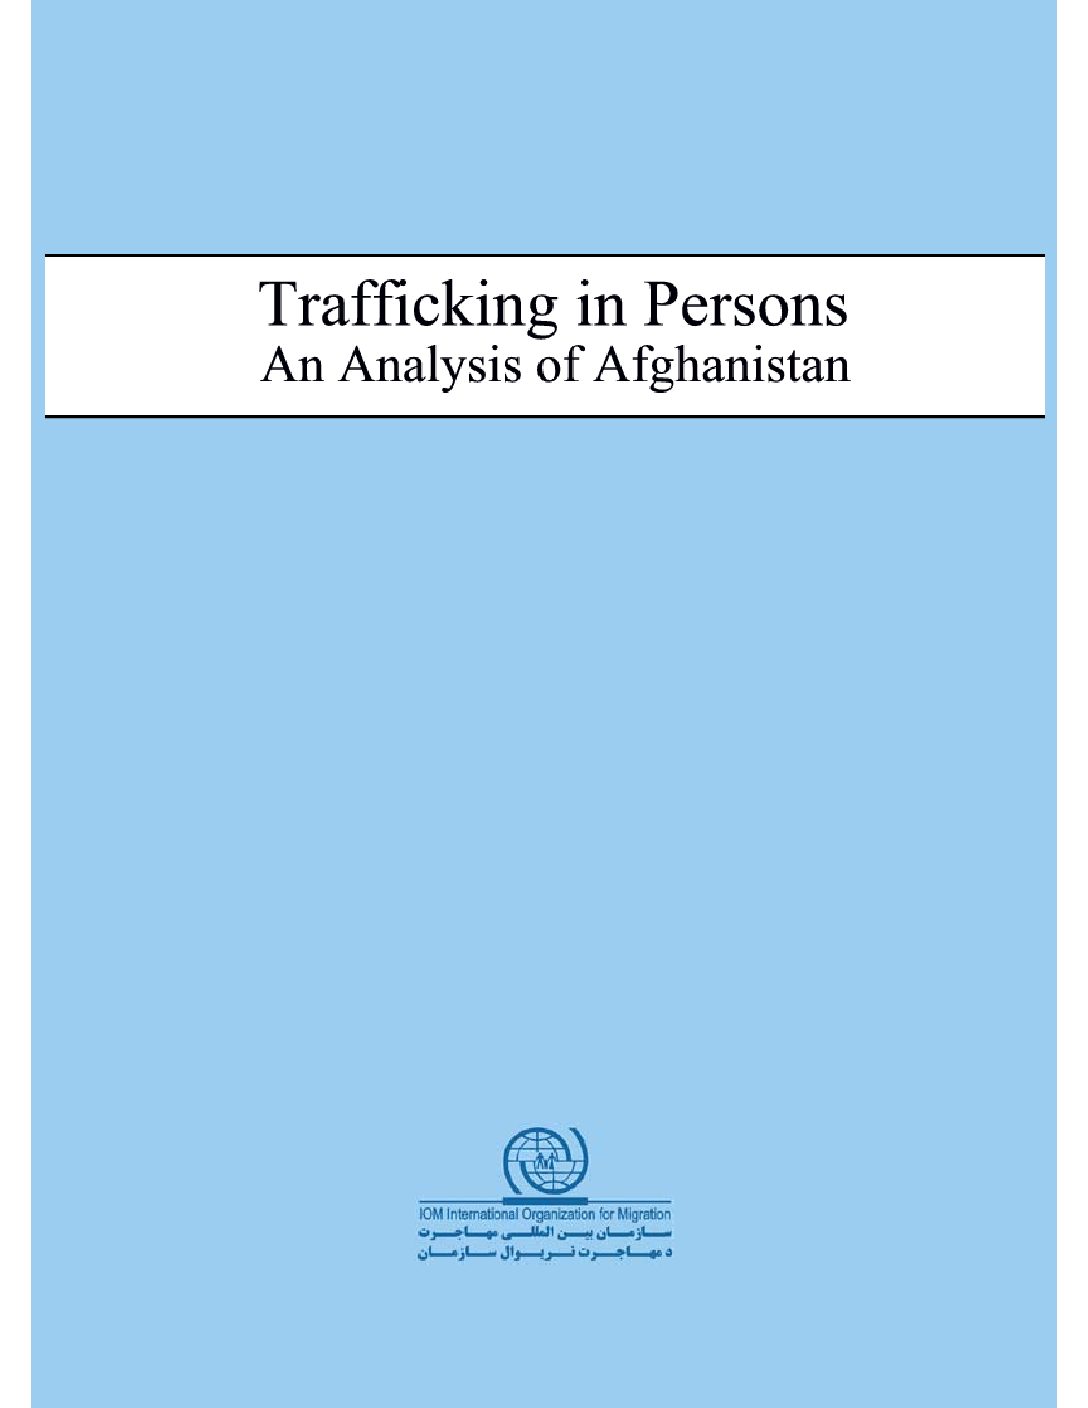 Trafficking in Persons: An Analysis of Afghanistan